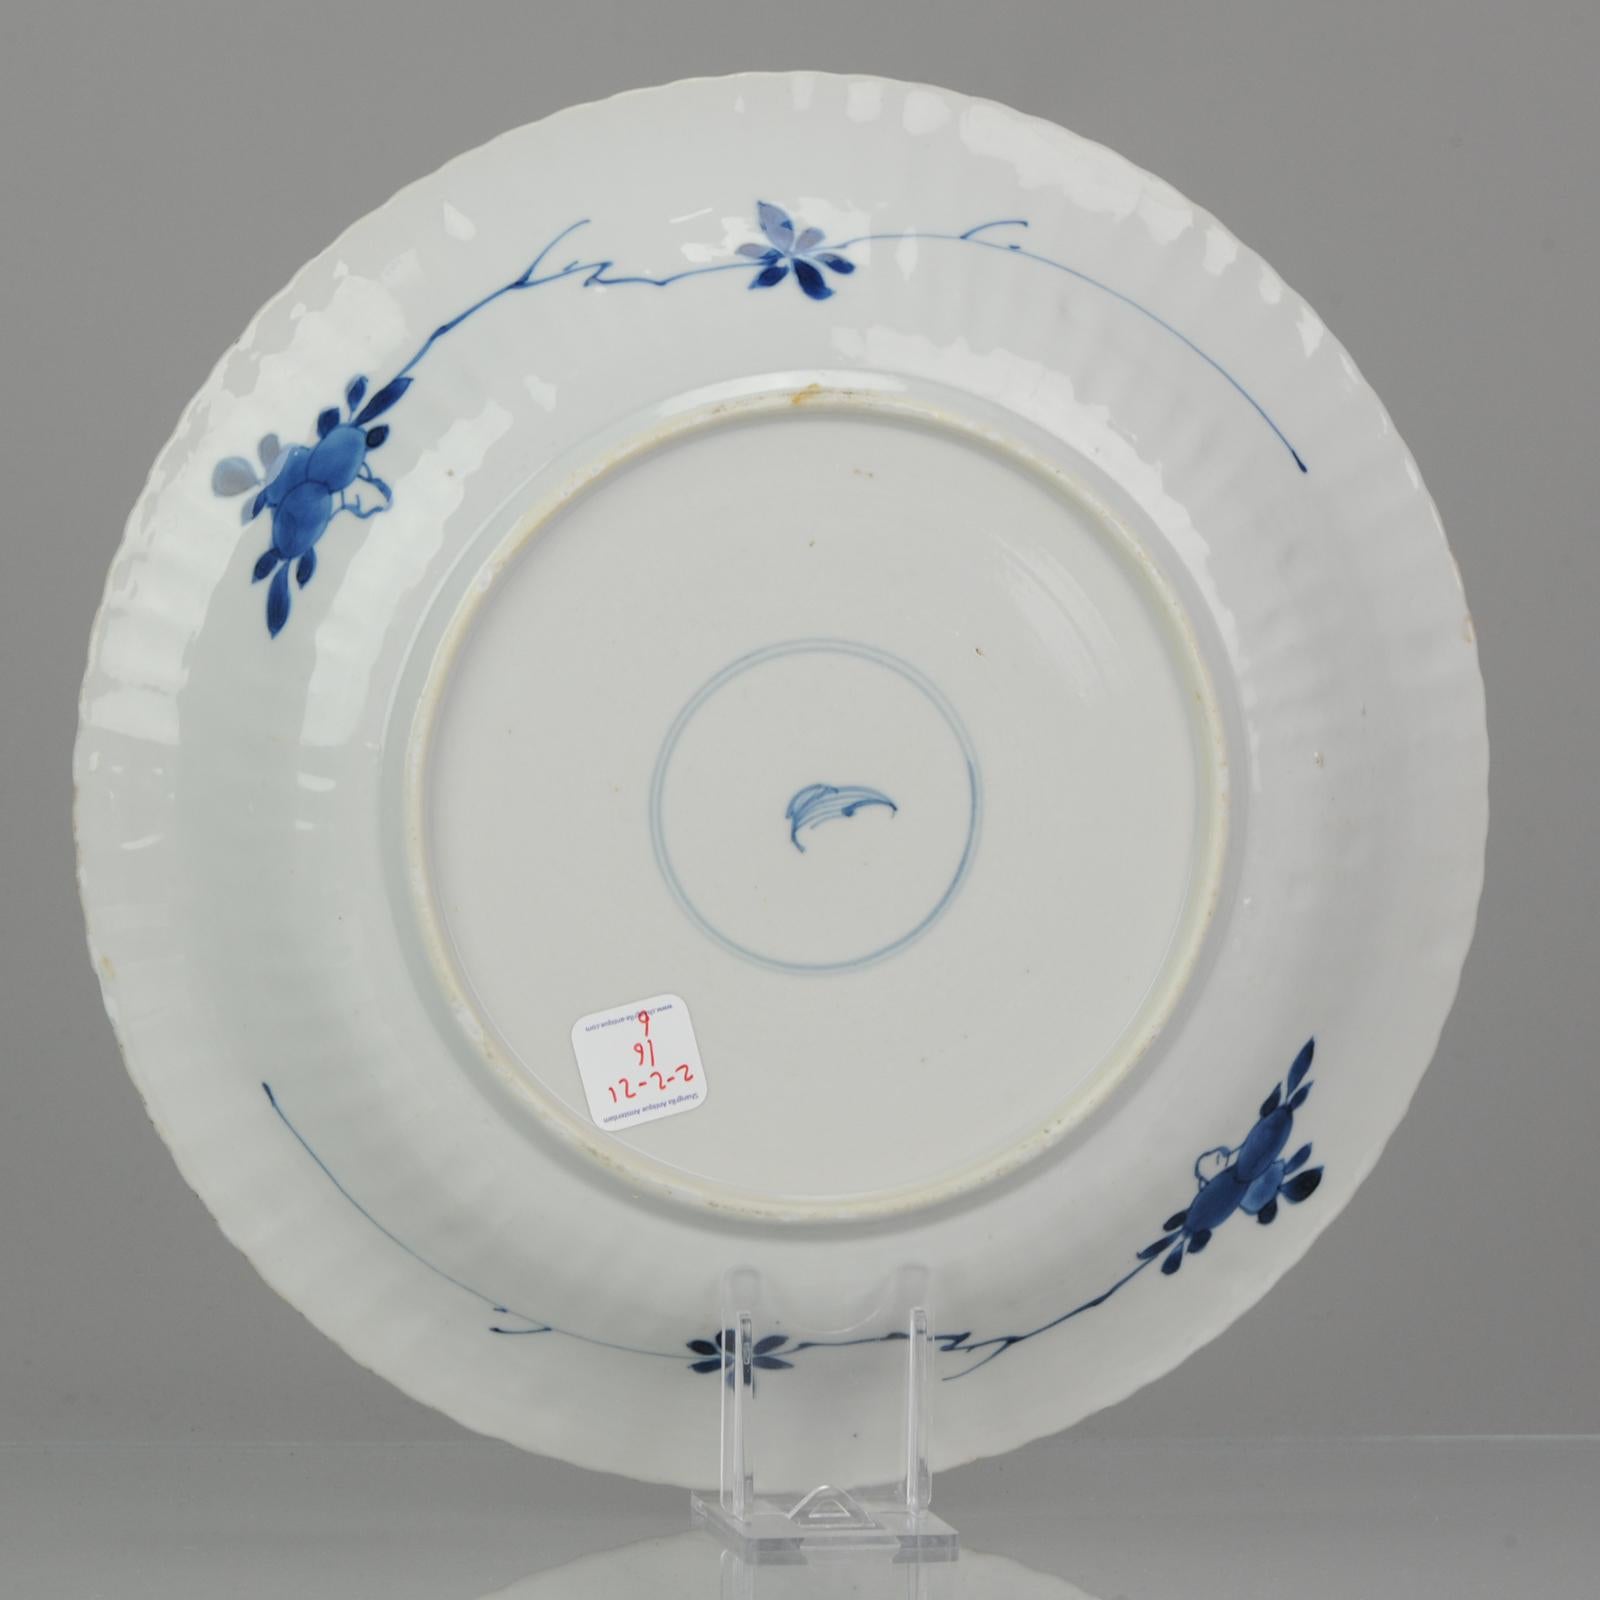 Antique 1700-1722 Kangxi Period Chinese Porcelain Double Plate Marked 3